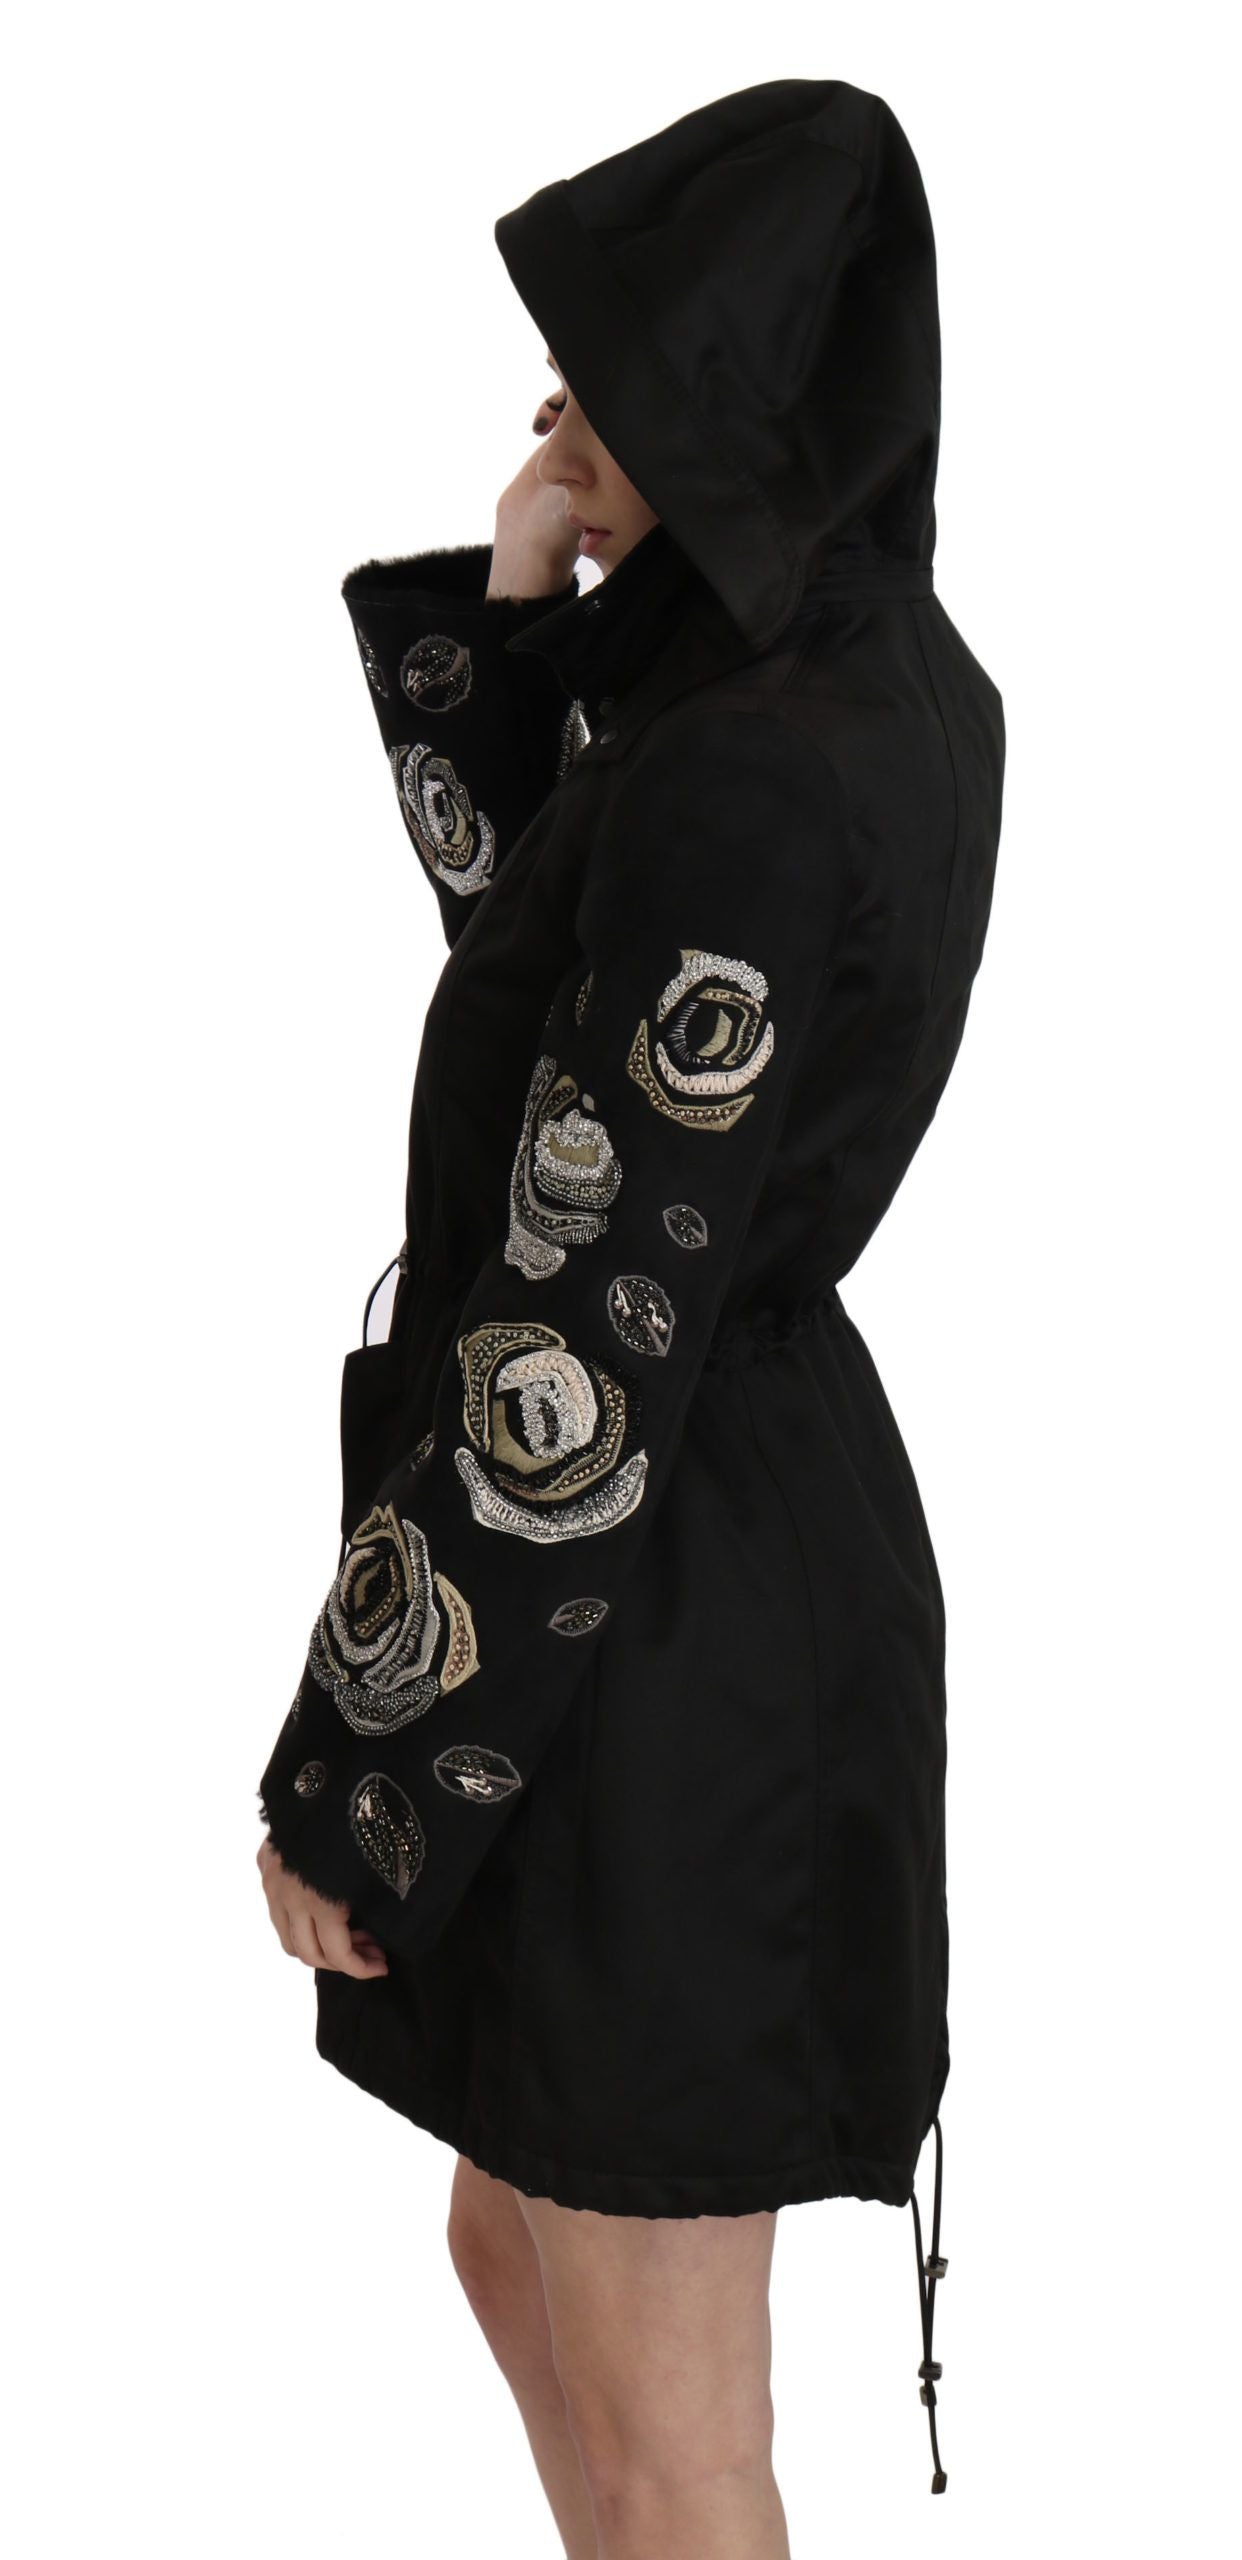 Floral Sequined Beaded Hooded Jacket Coat - Designed by John Richmond Available to Buy at a Discounted Price on Moon Behind The Hill Online Designer Discount Store